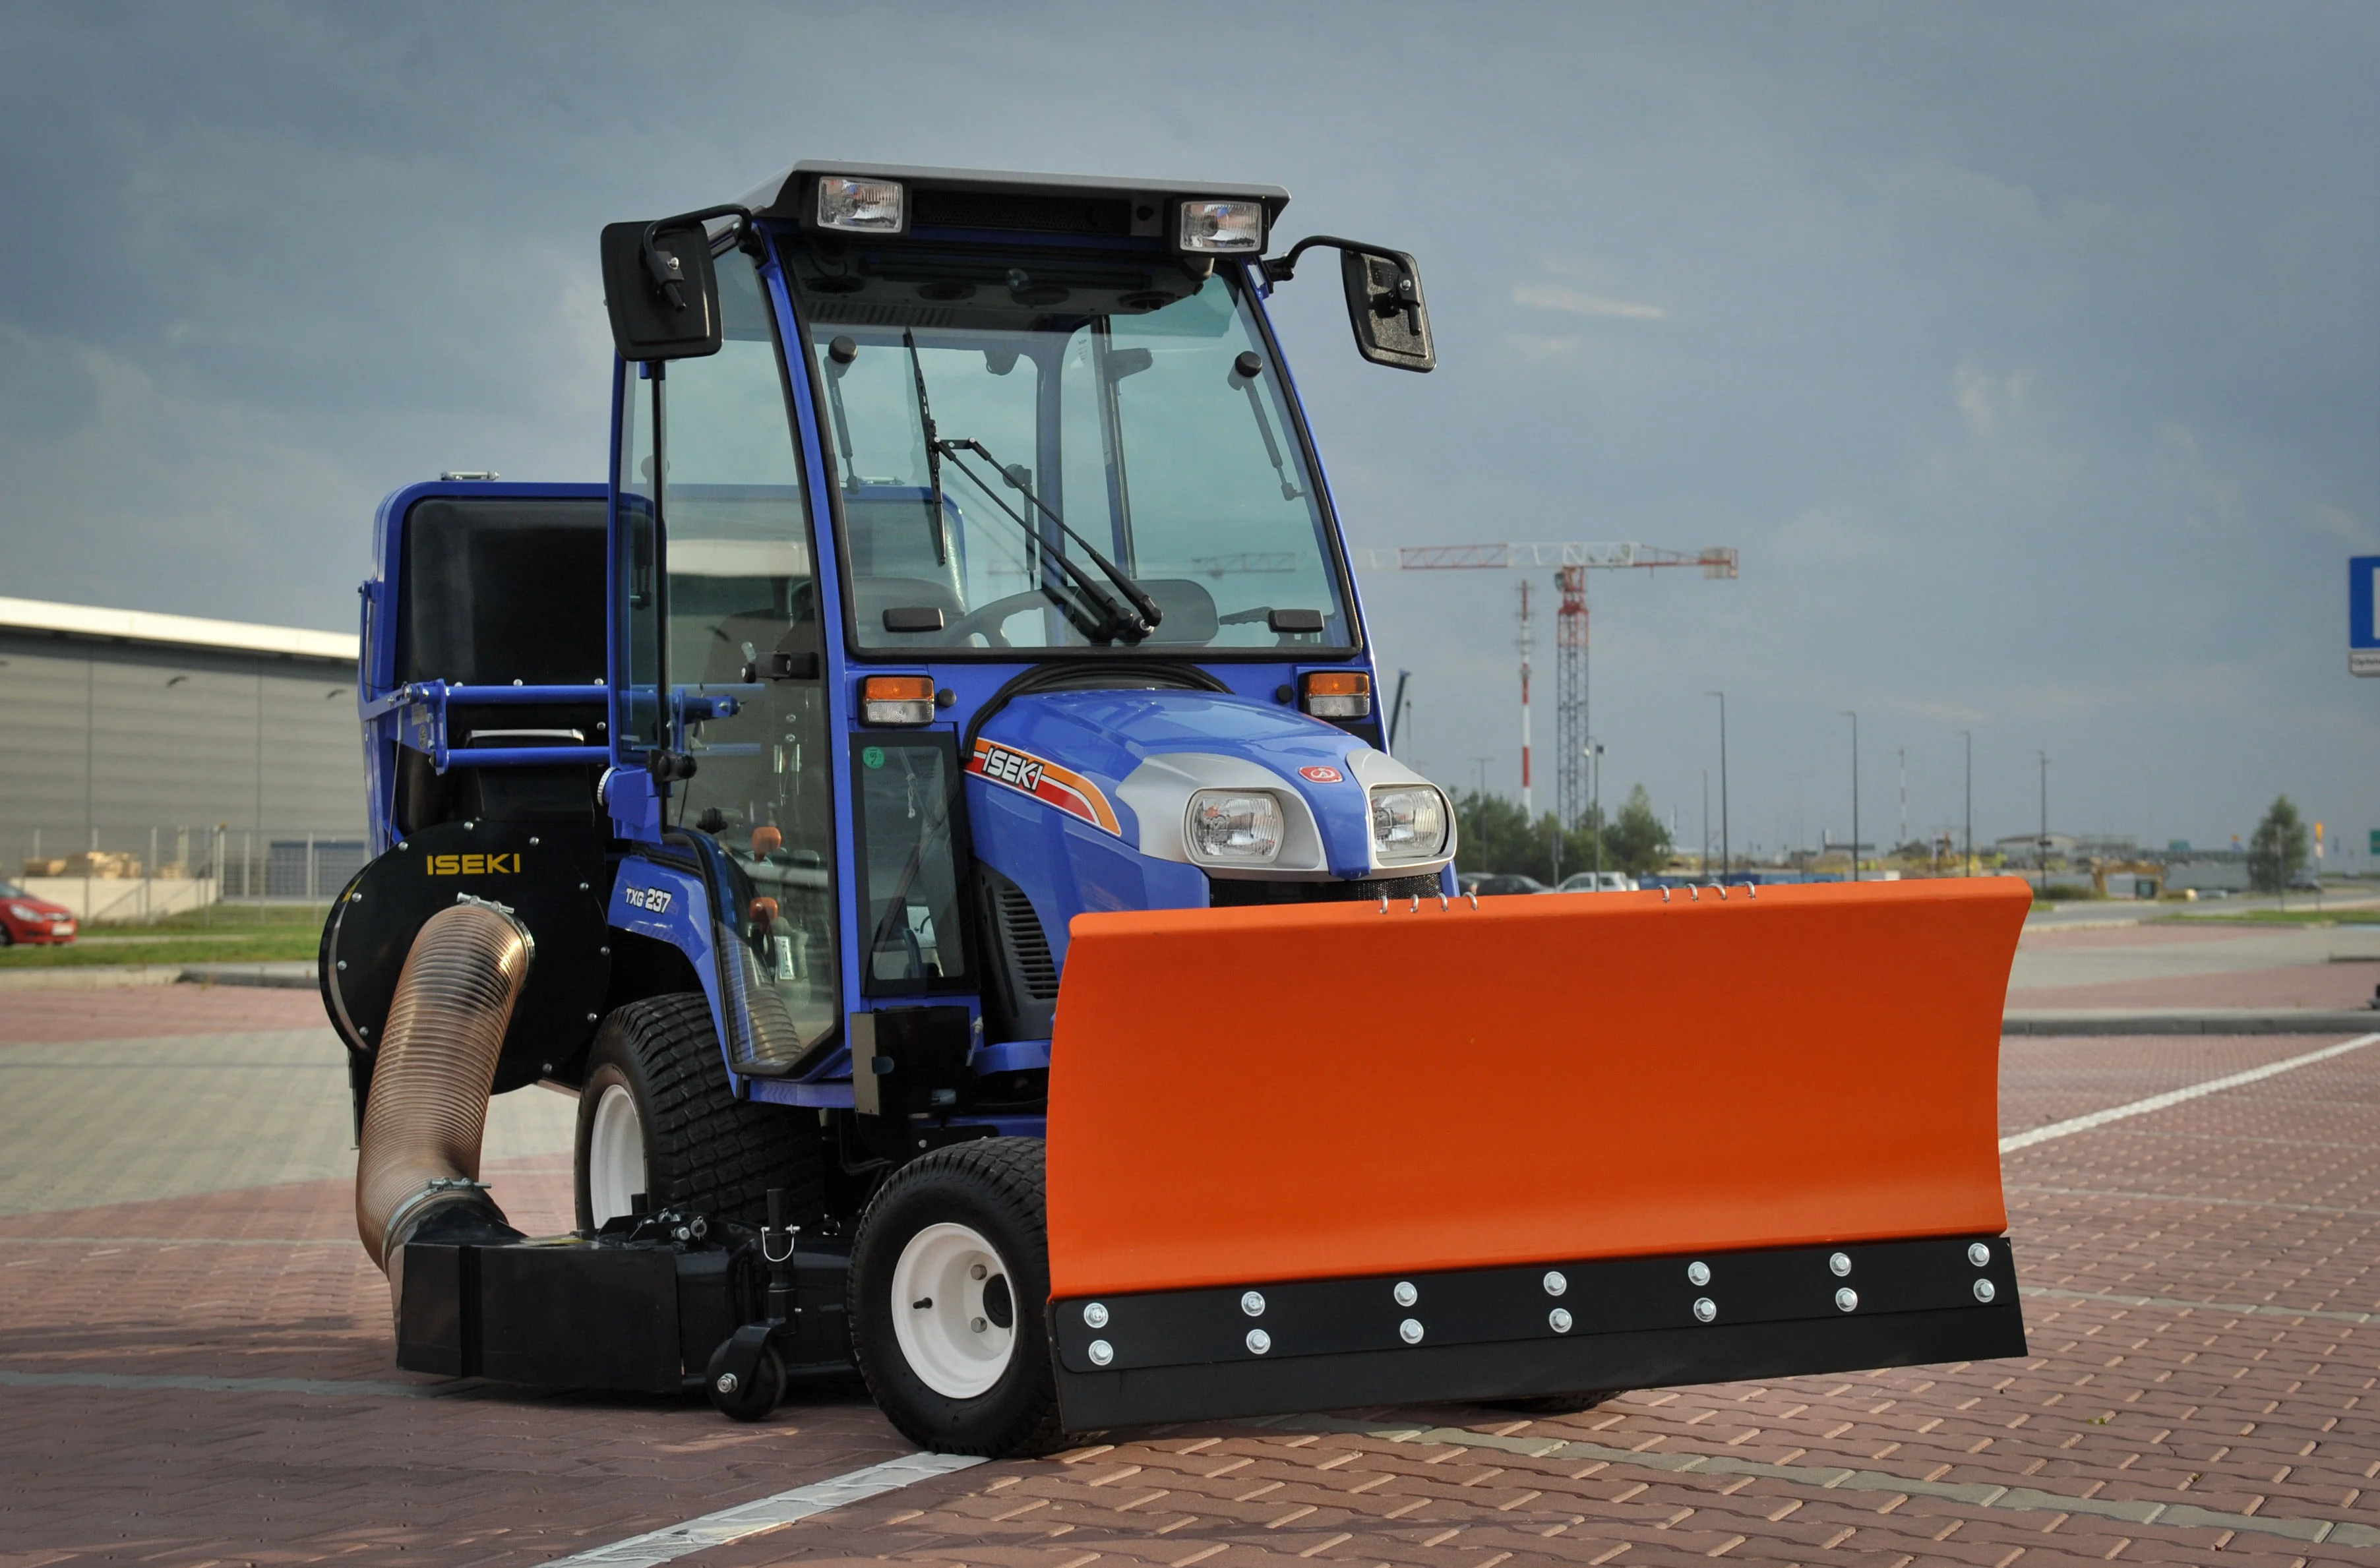 Iseki TXG237, 3-cylinder diesel with 27 HP - version with cab, grass catcher and snow plow